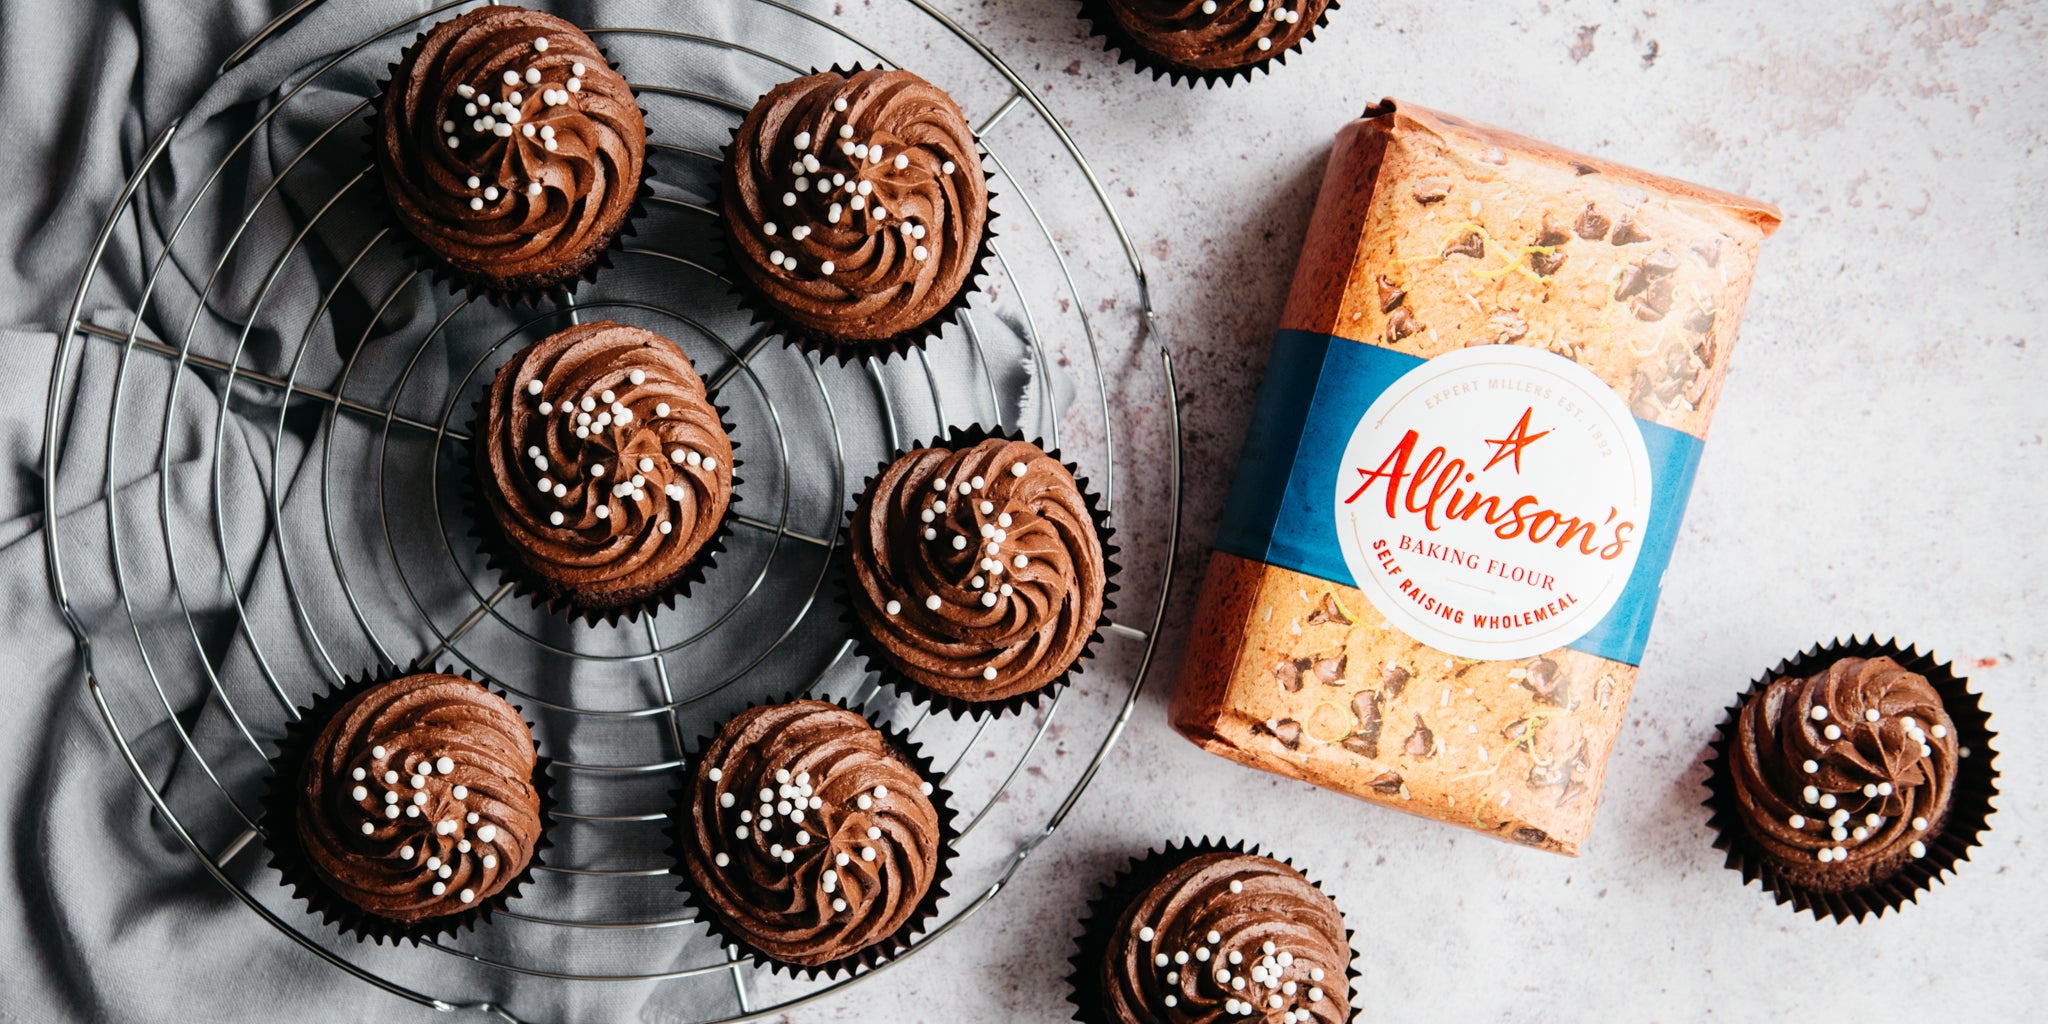 Flat lay Wholemeal Chocolate Cupcakes next to a bag of Allinson's Wholemeal Self Raising flour